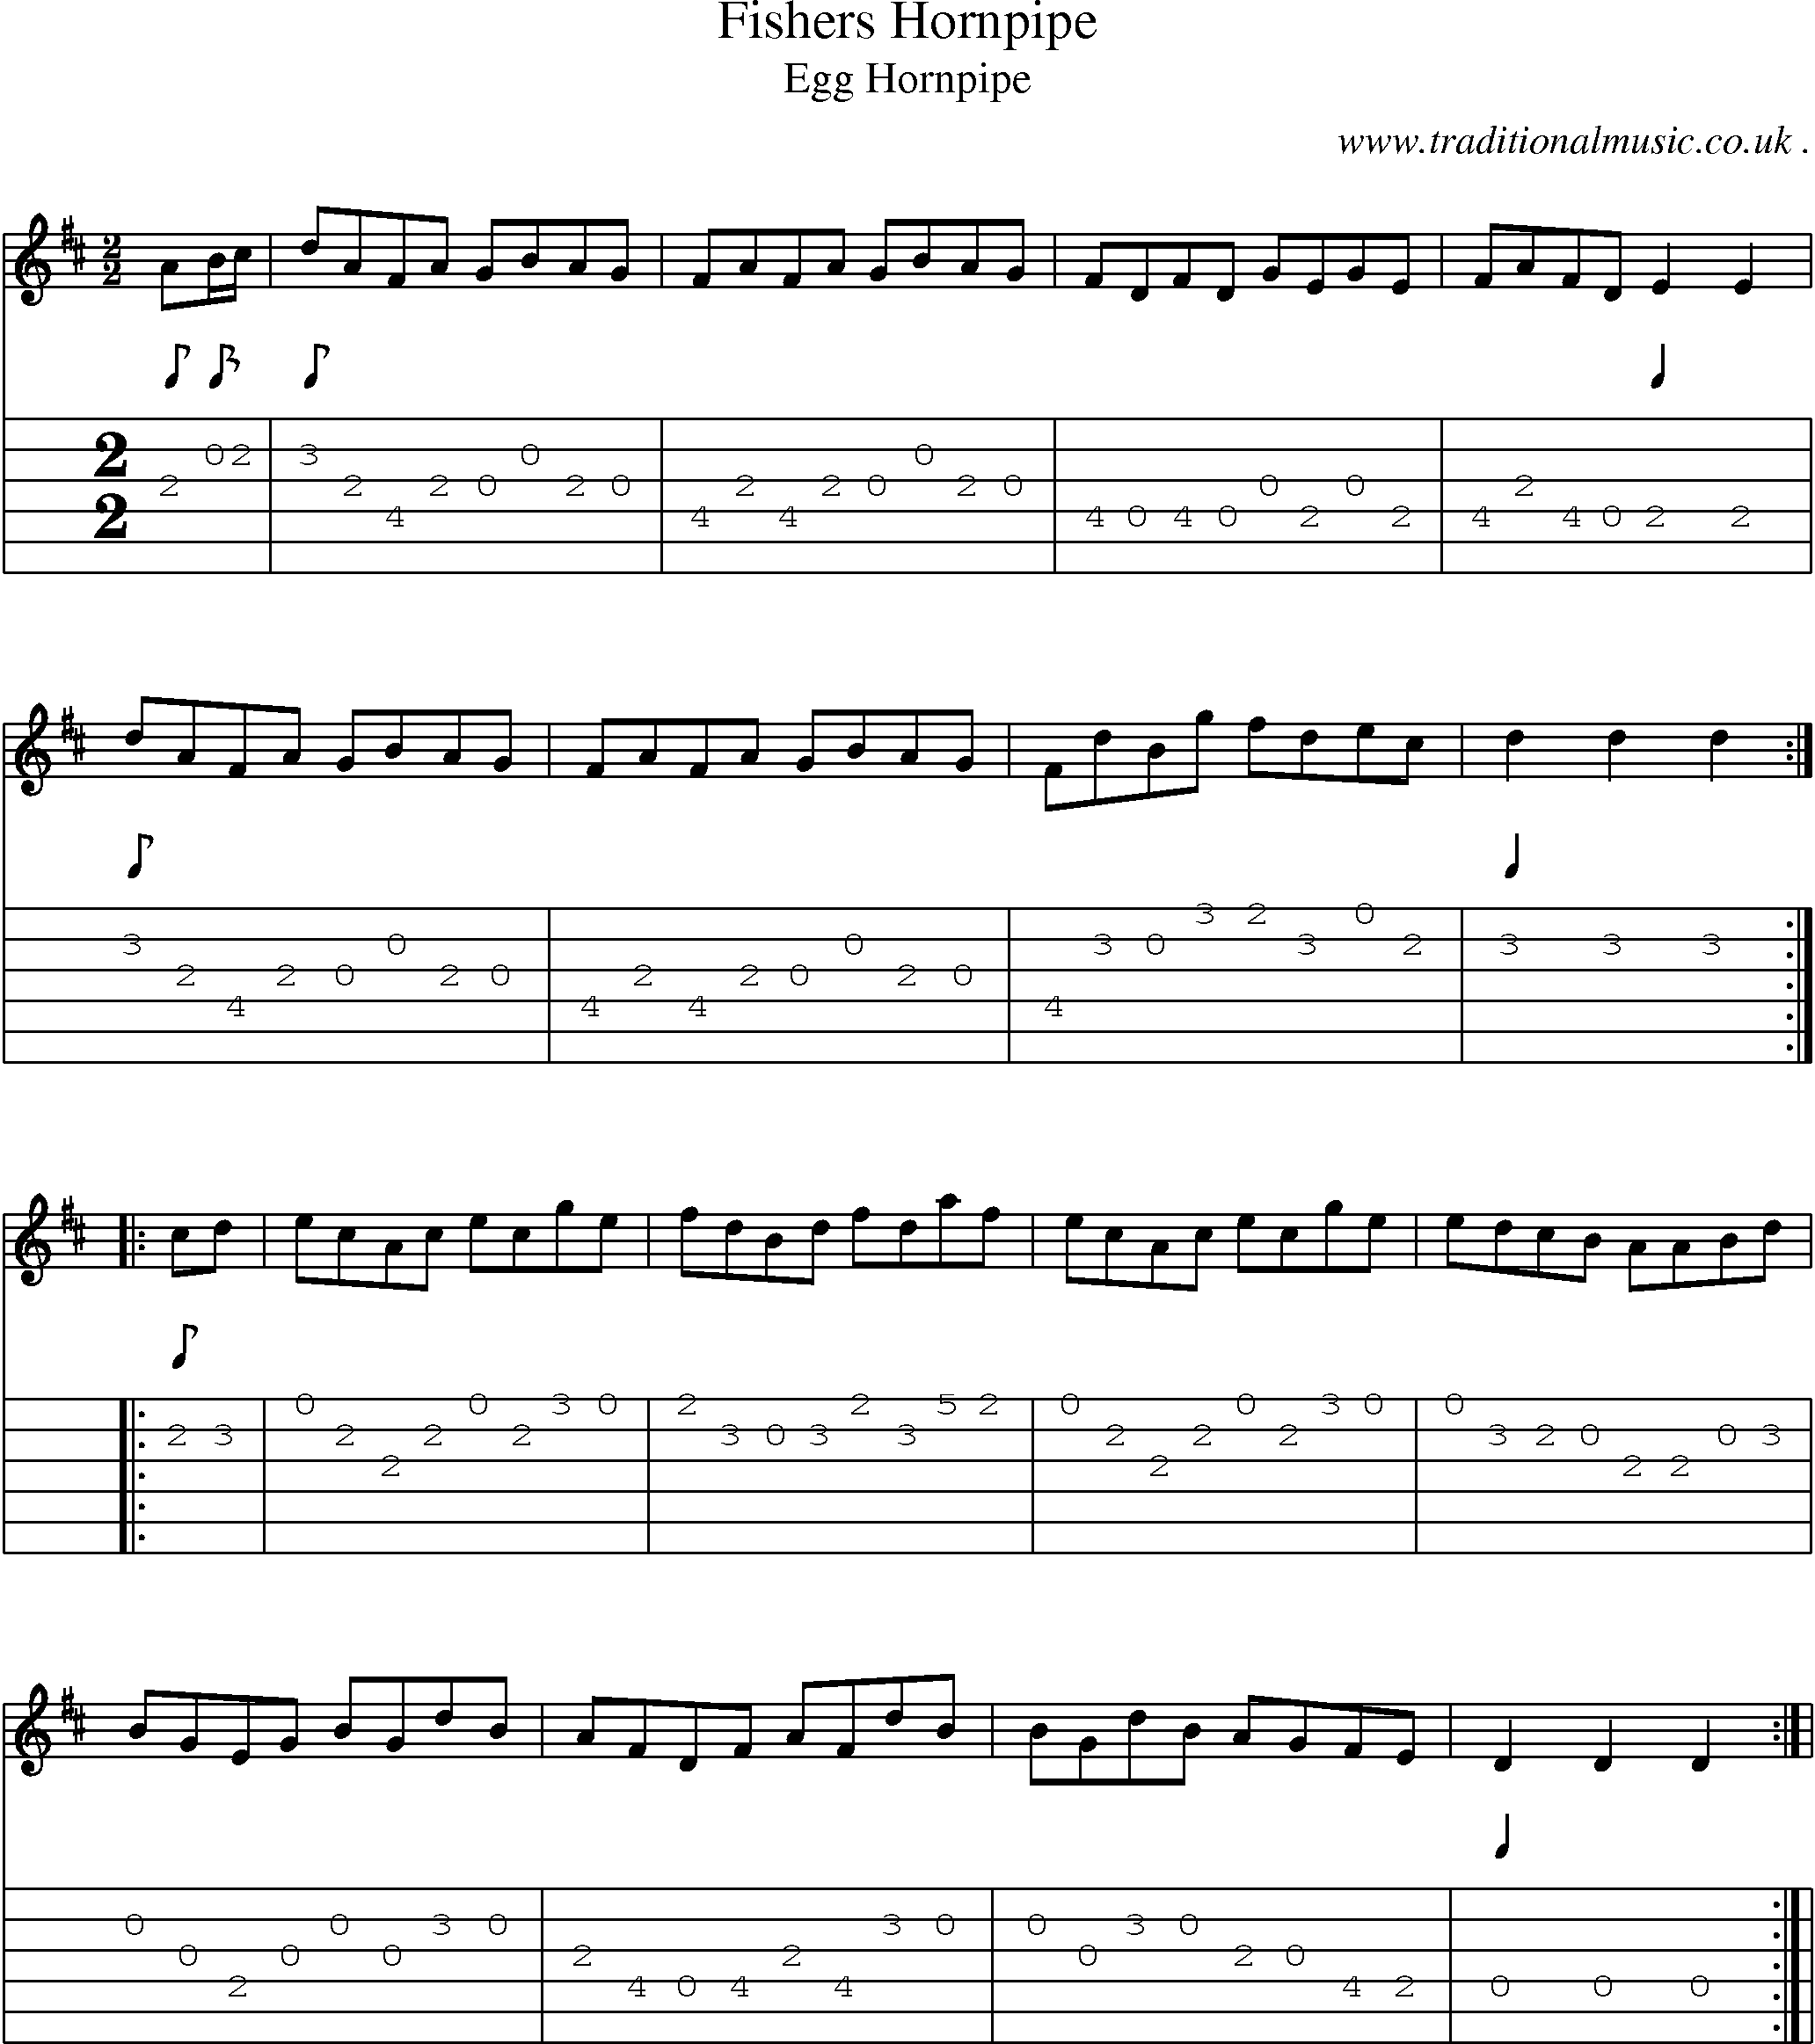 Sheet-Music and Guitar Tabs for Fishers Hornpipe